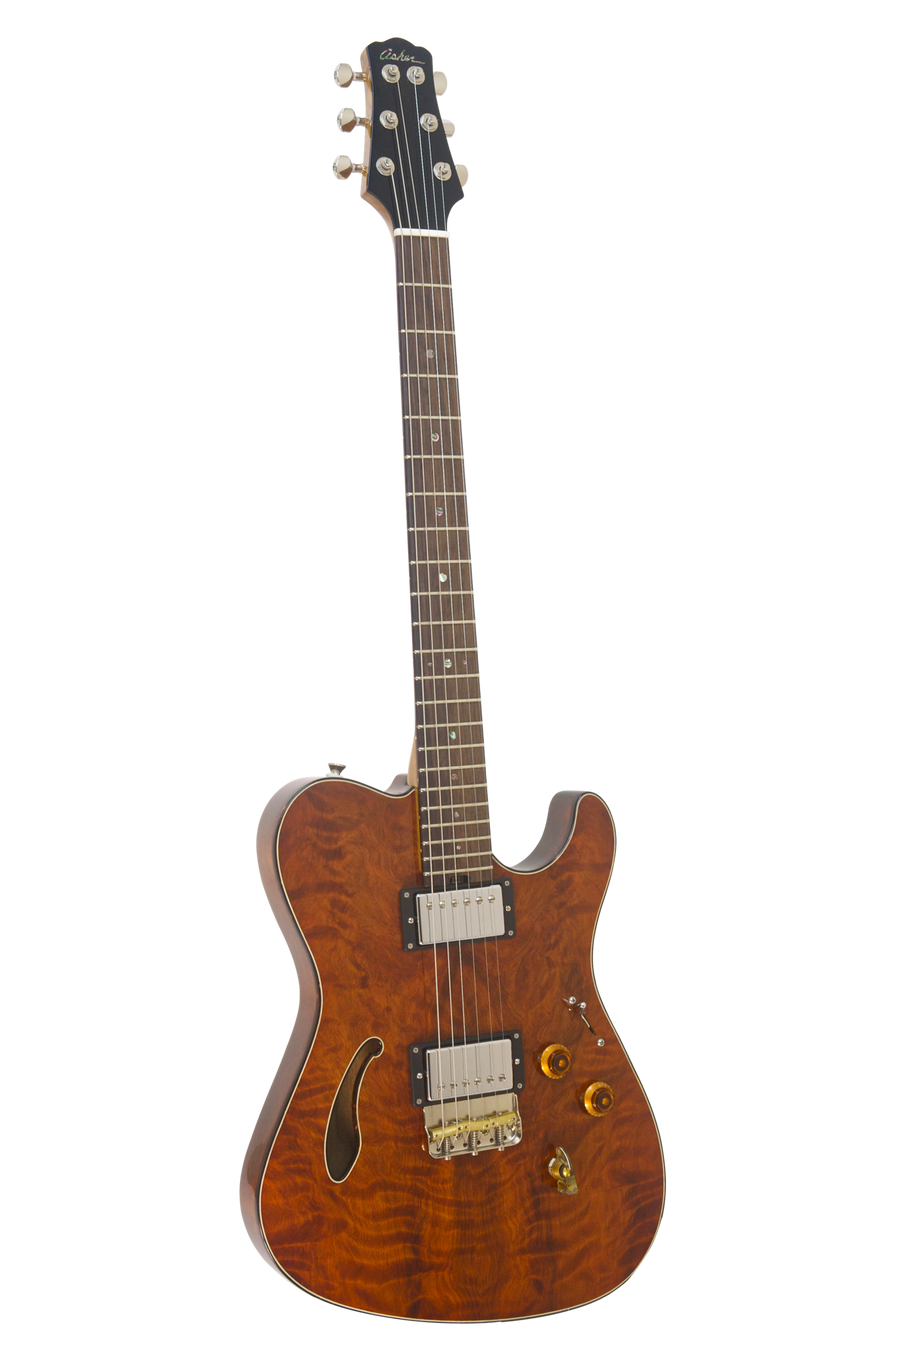 SOLD Asher Guitars 2015 Hollow T Deluxe Custom #842 with California Redwood top and custom wound pickups